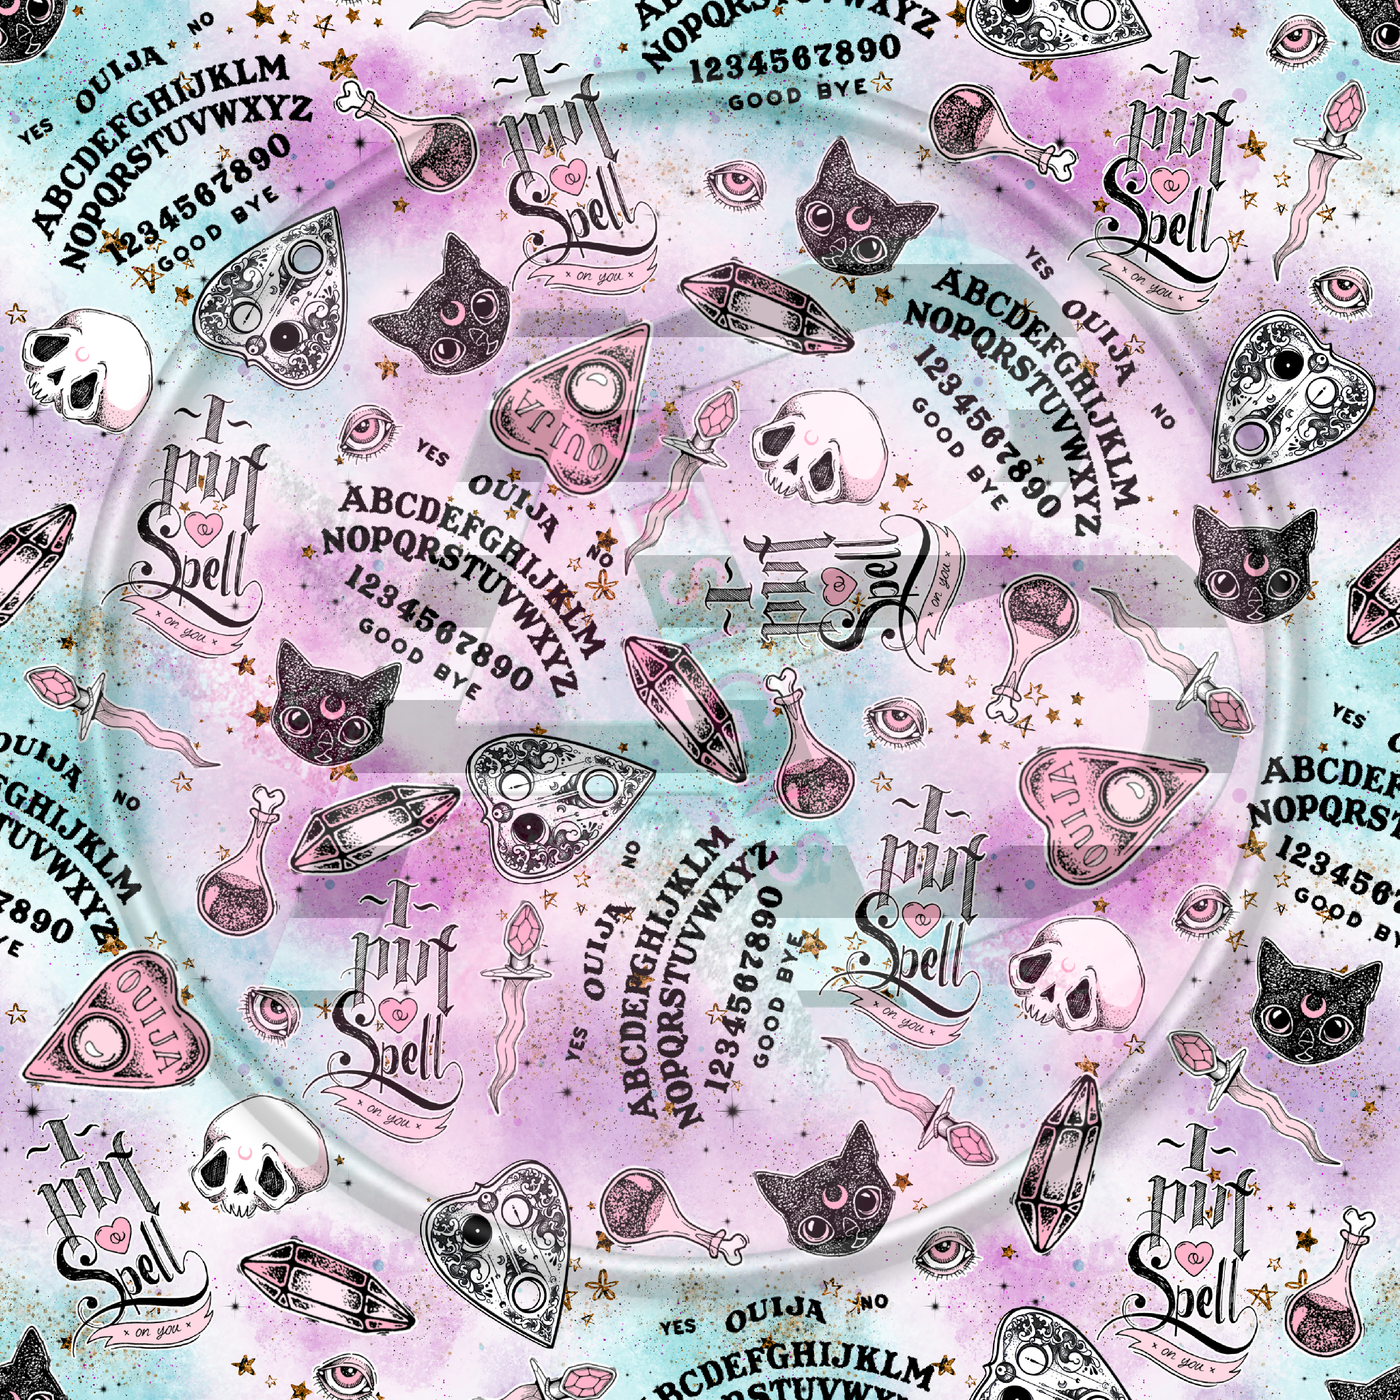 Adhesive Patterned Vinyl - Witchy 333